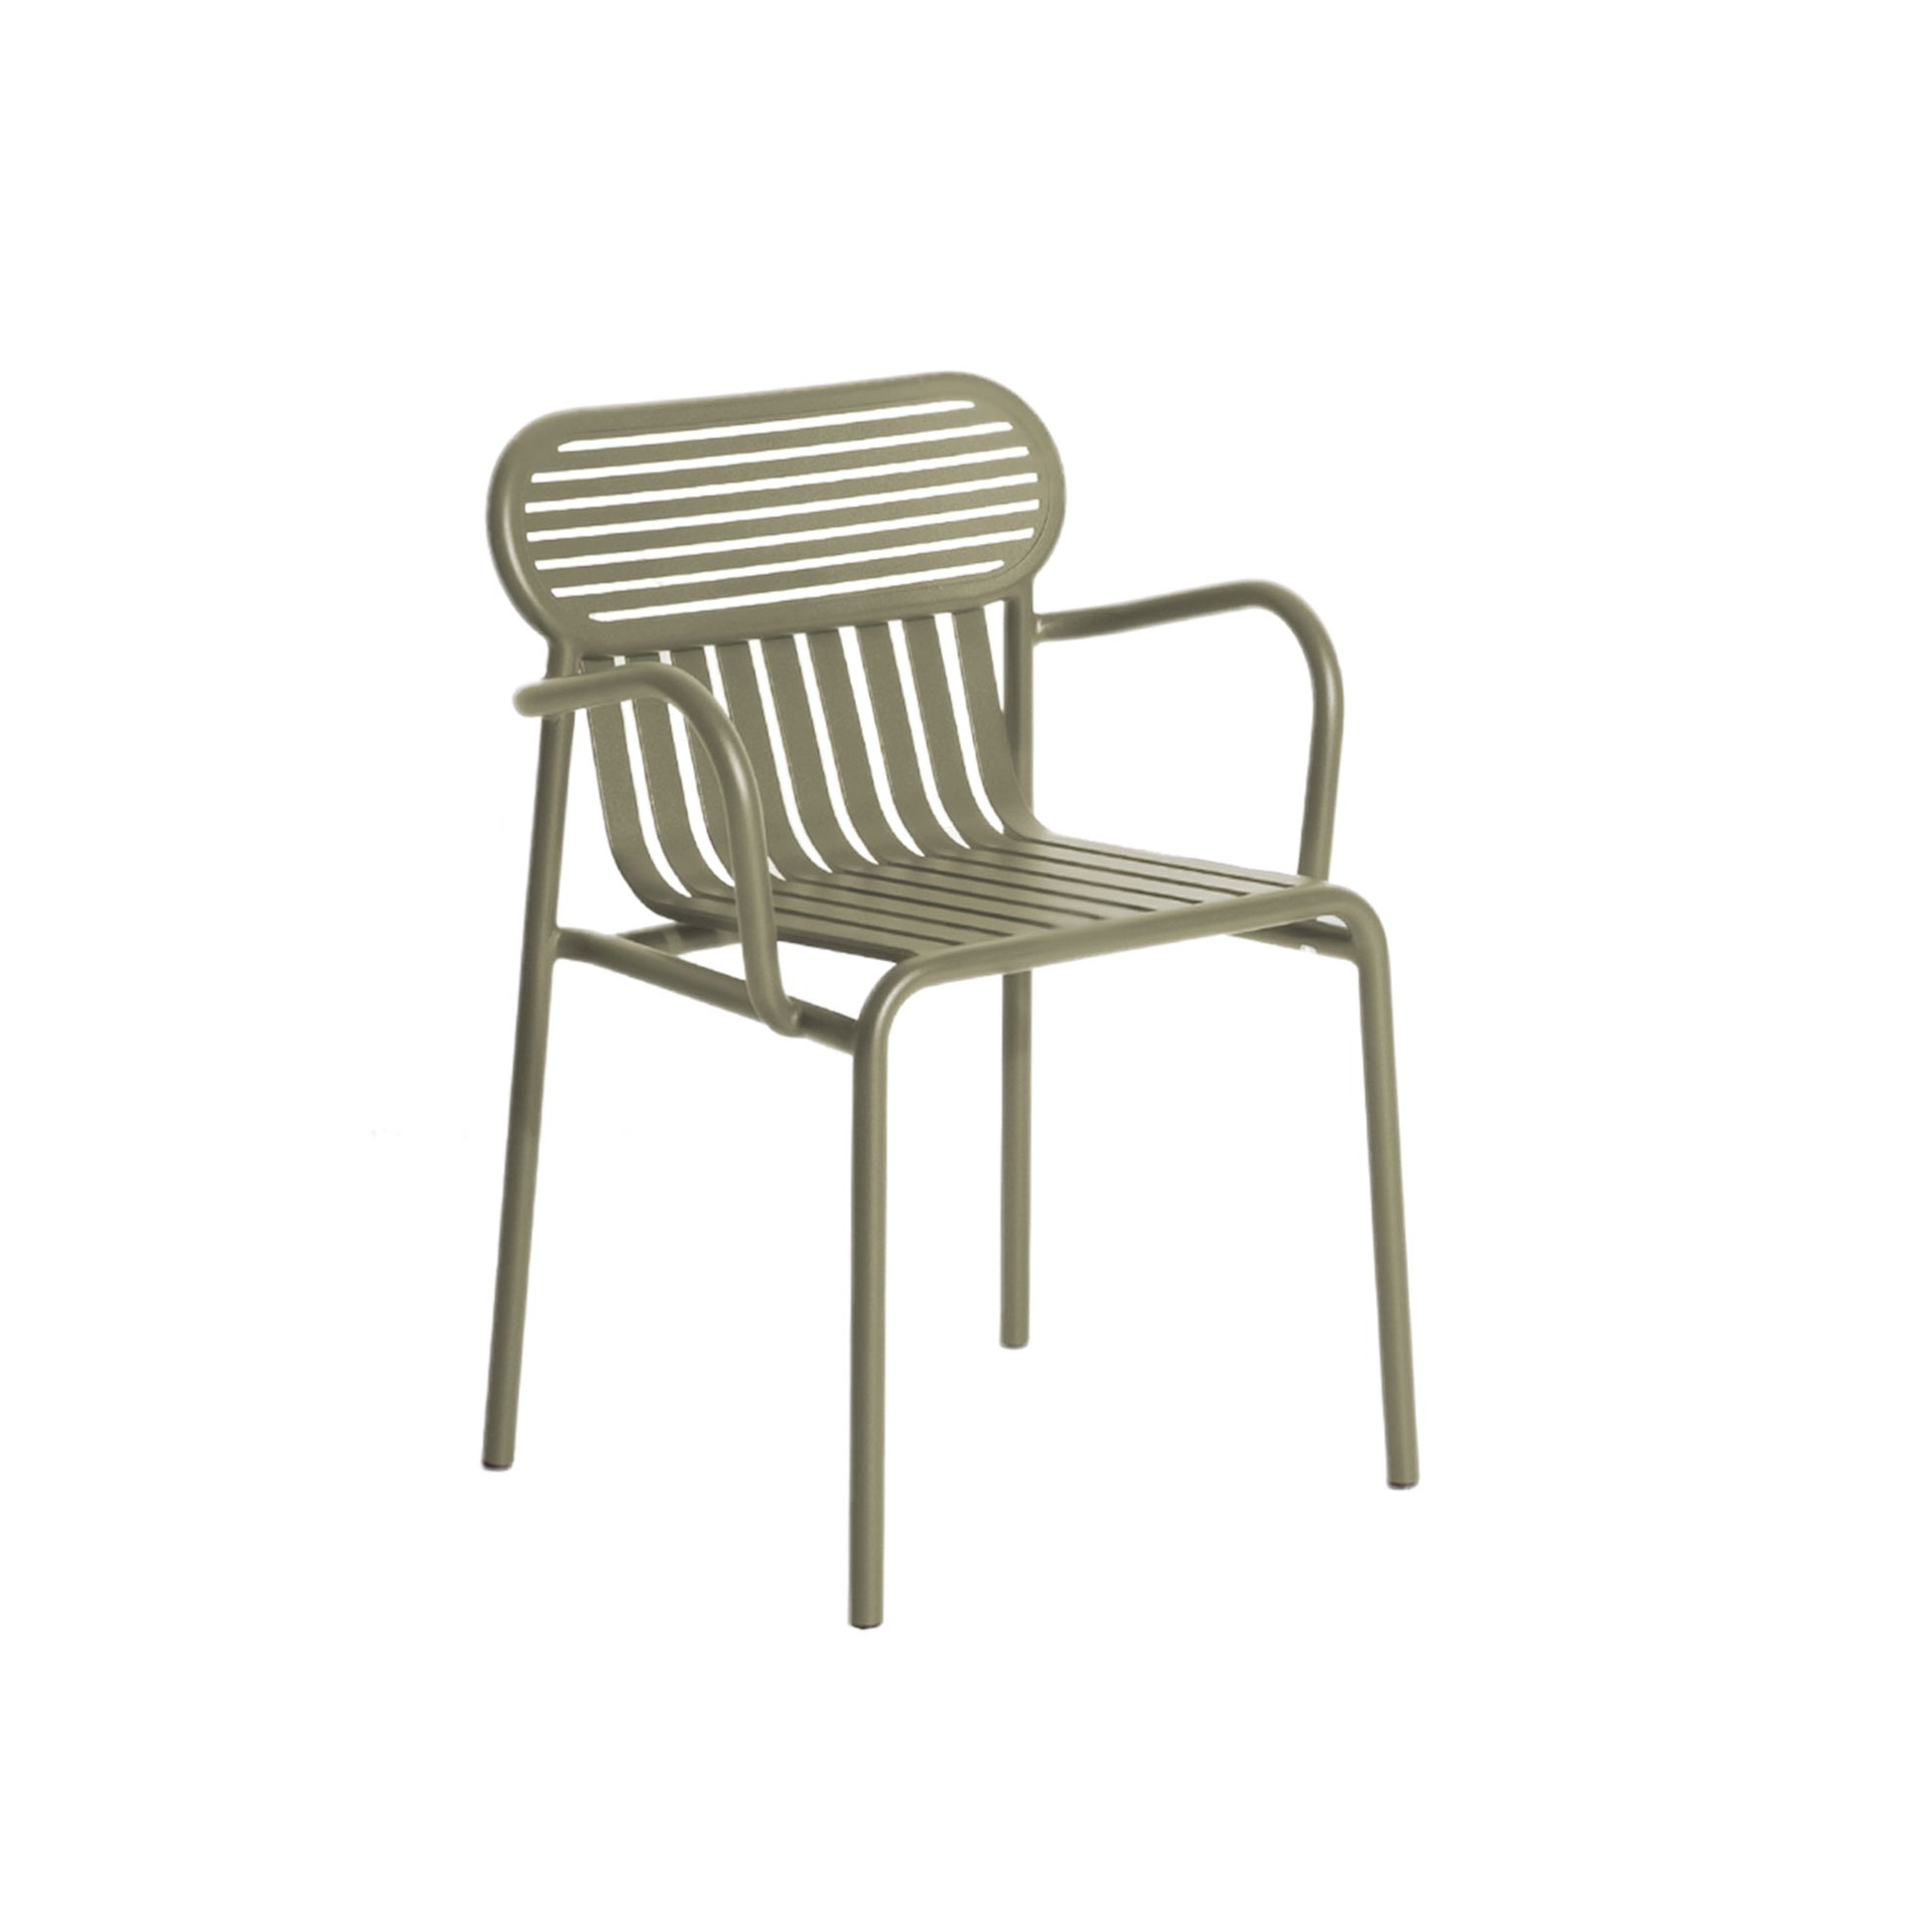 WEEK-END Dining Chair with Armrests by Petite Friture #Jade green